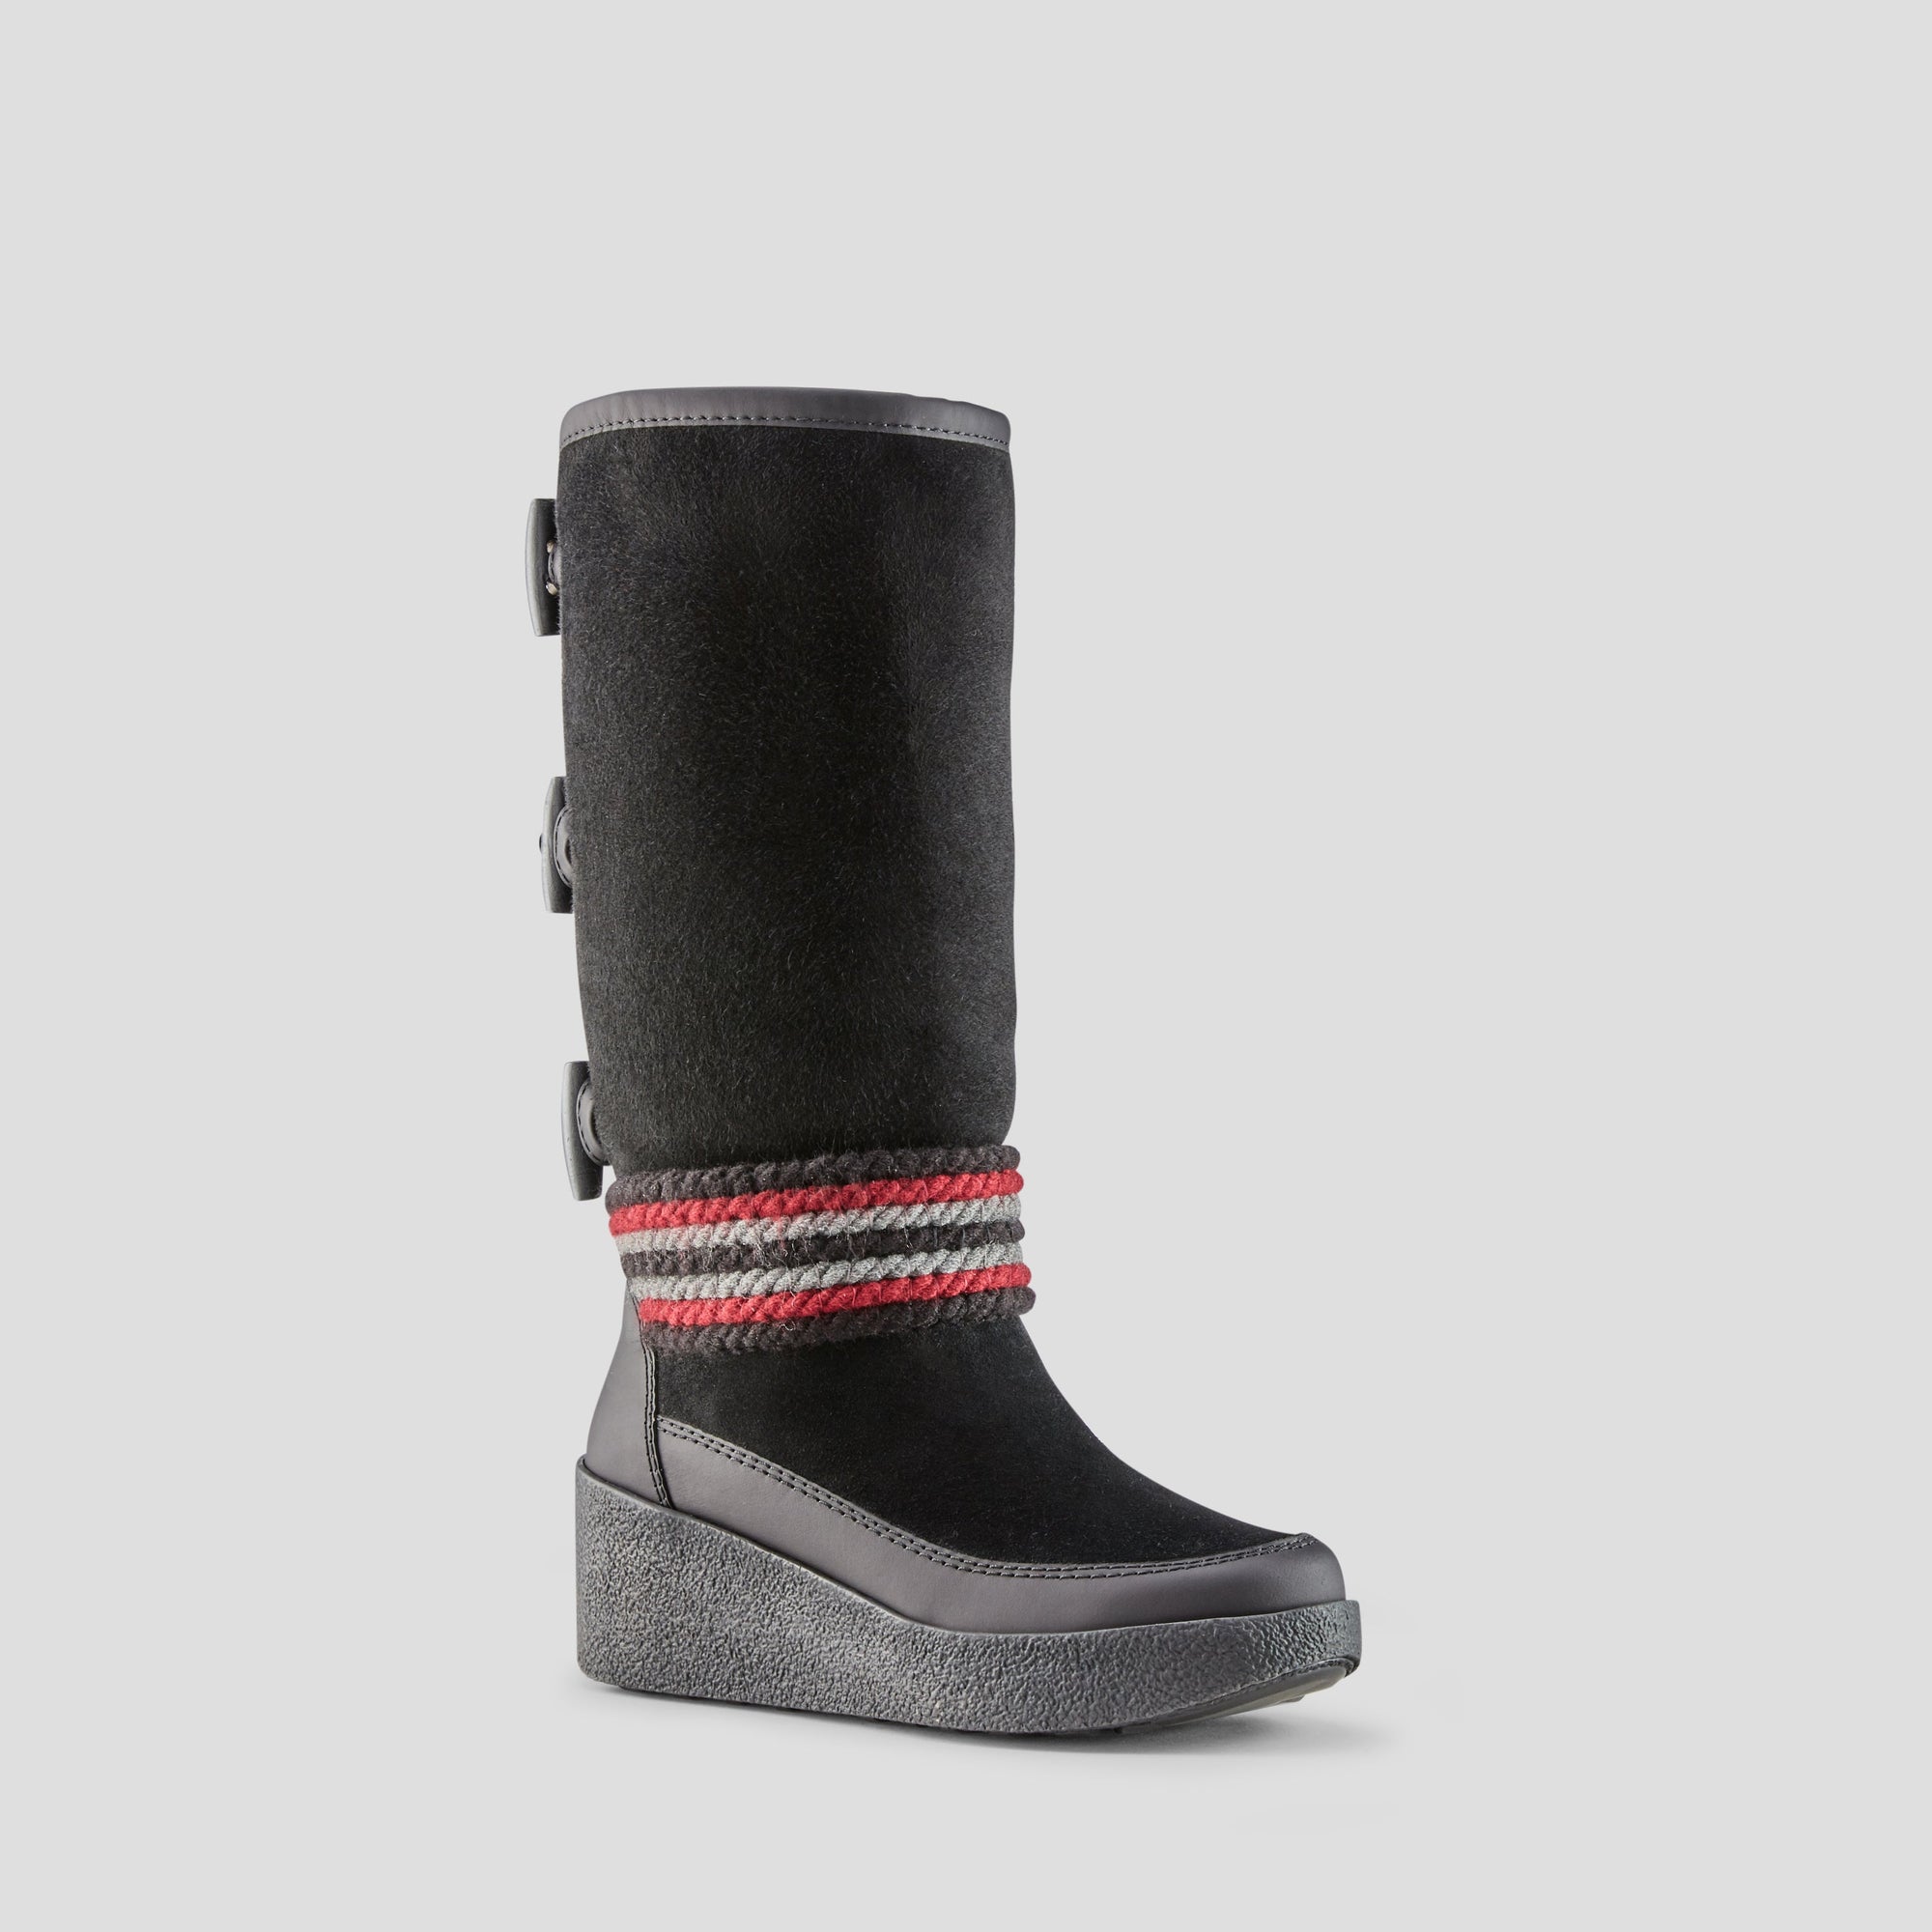 Duncan Suede Shearling Boot - Colour Black